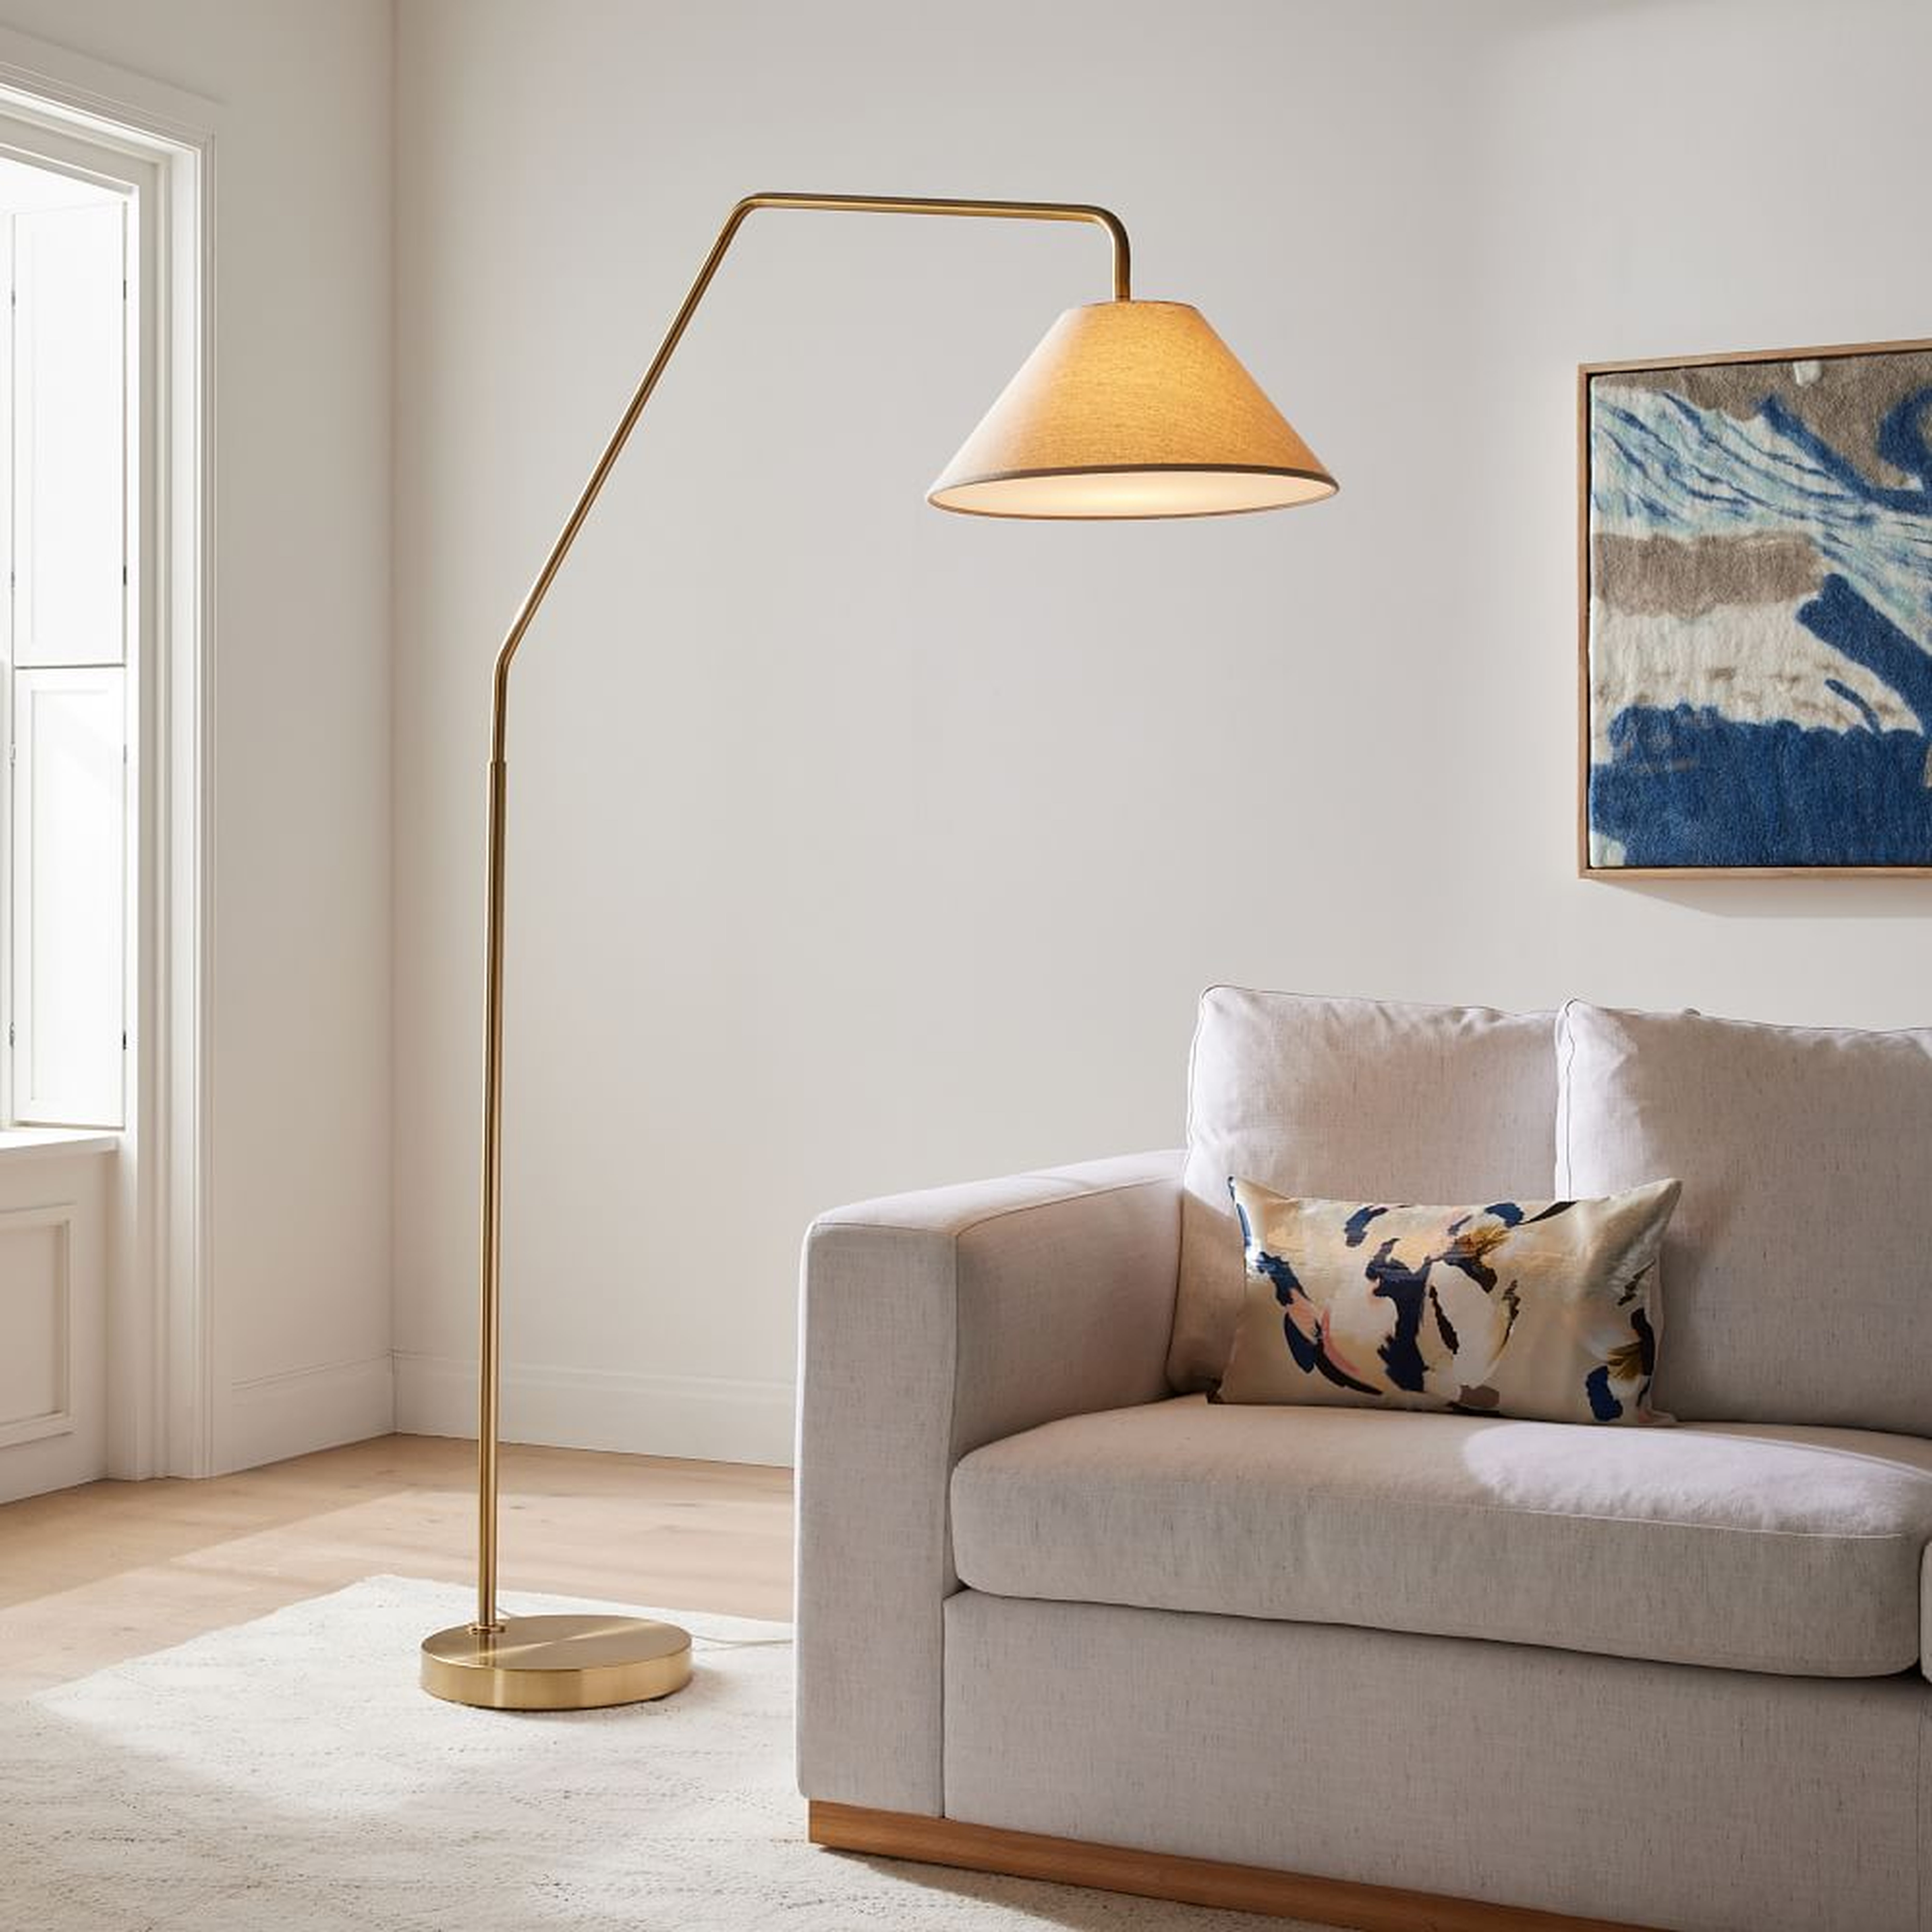 Sculptural Overarching Floor Lamp, Fabric Cone 18" Natural, Antique Brass, 18" - West Elm